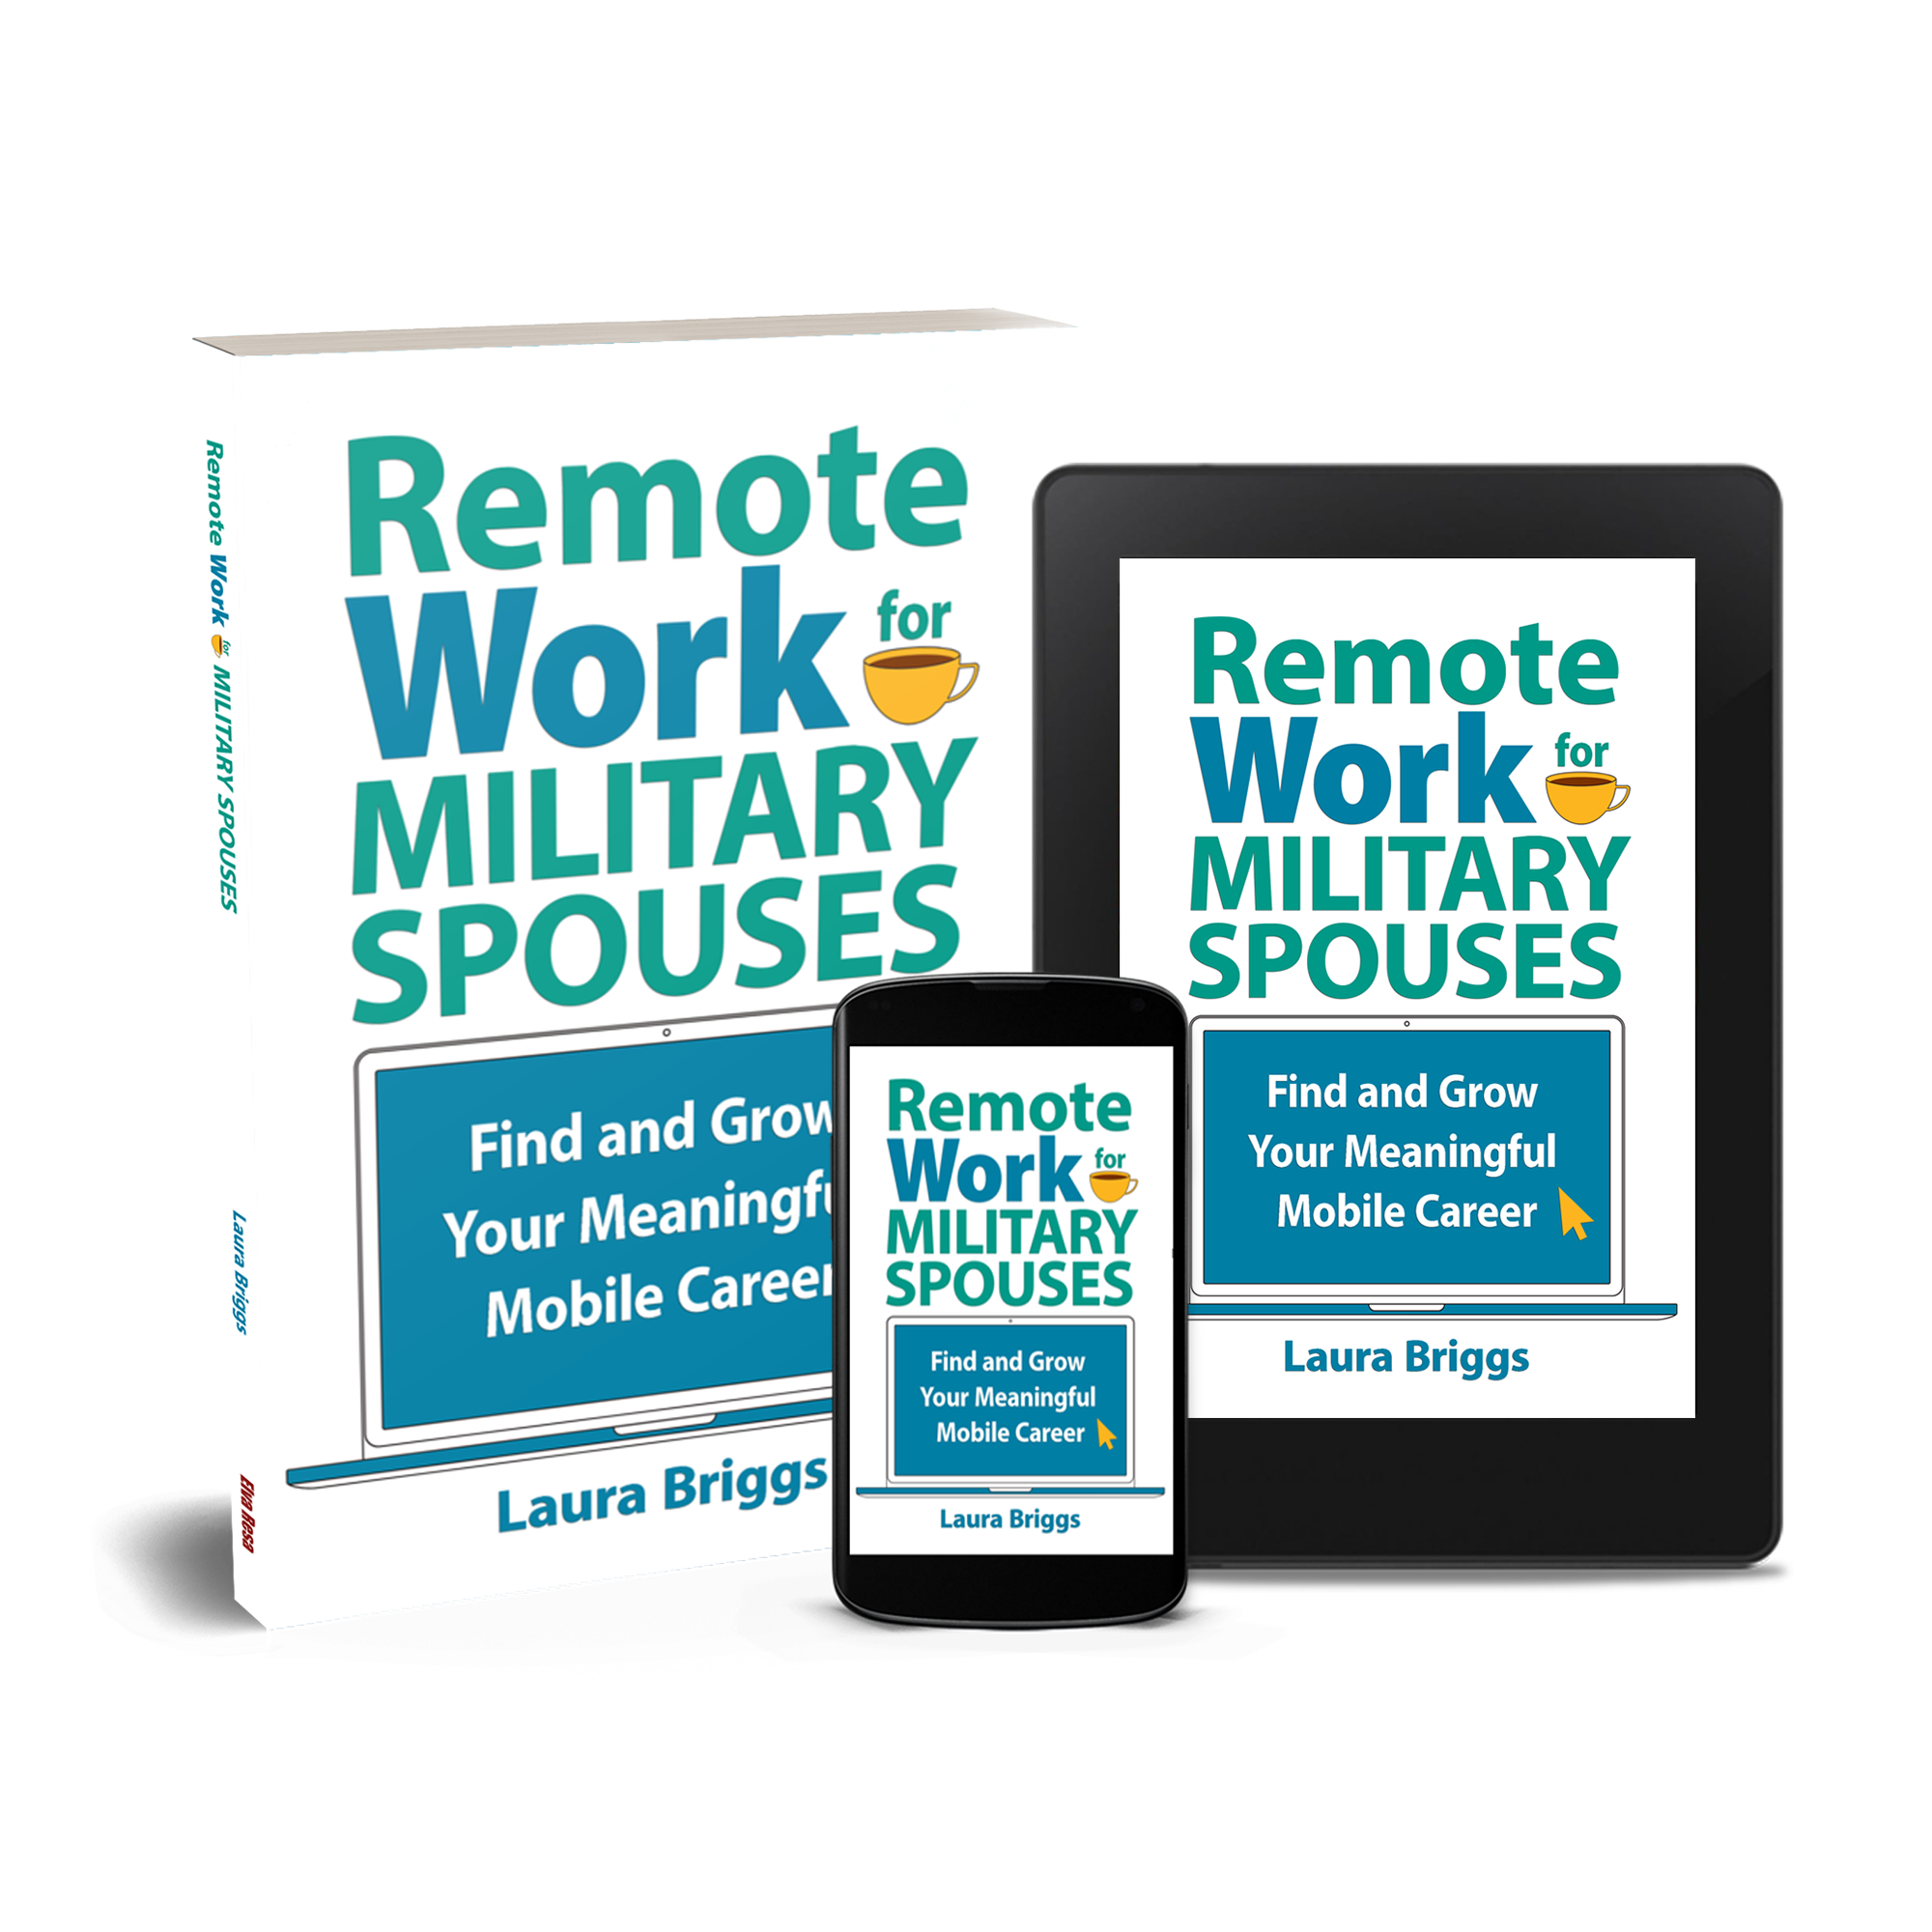 Remote Work for Military Spouses by Laura Briggs, published by Elva Resa Publishing